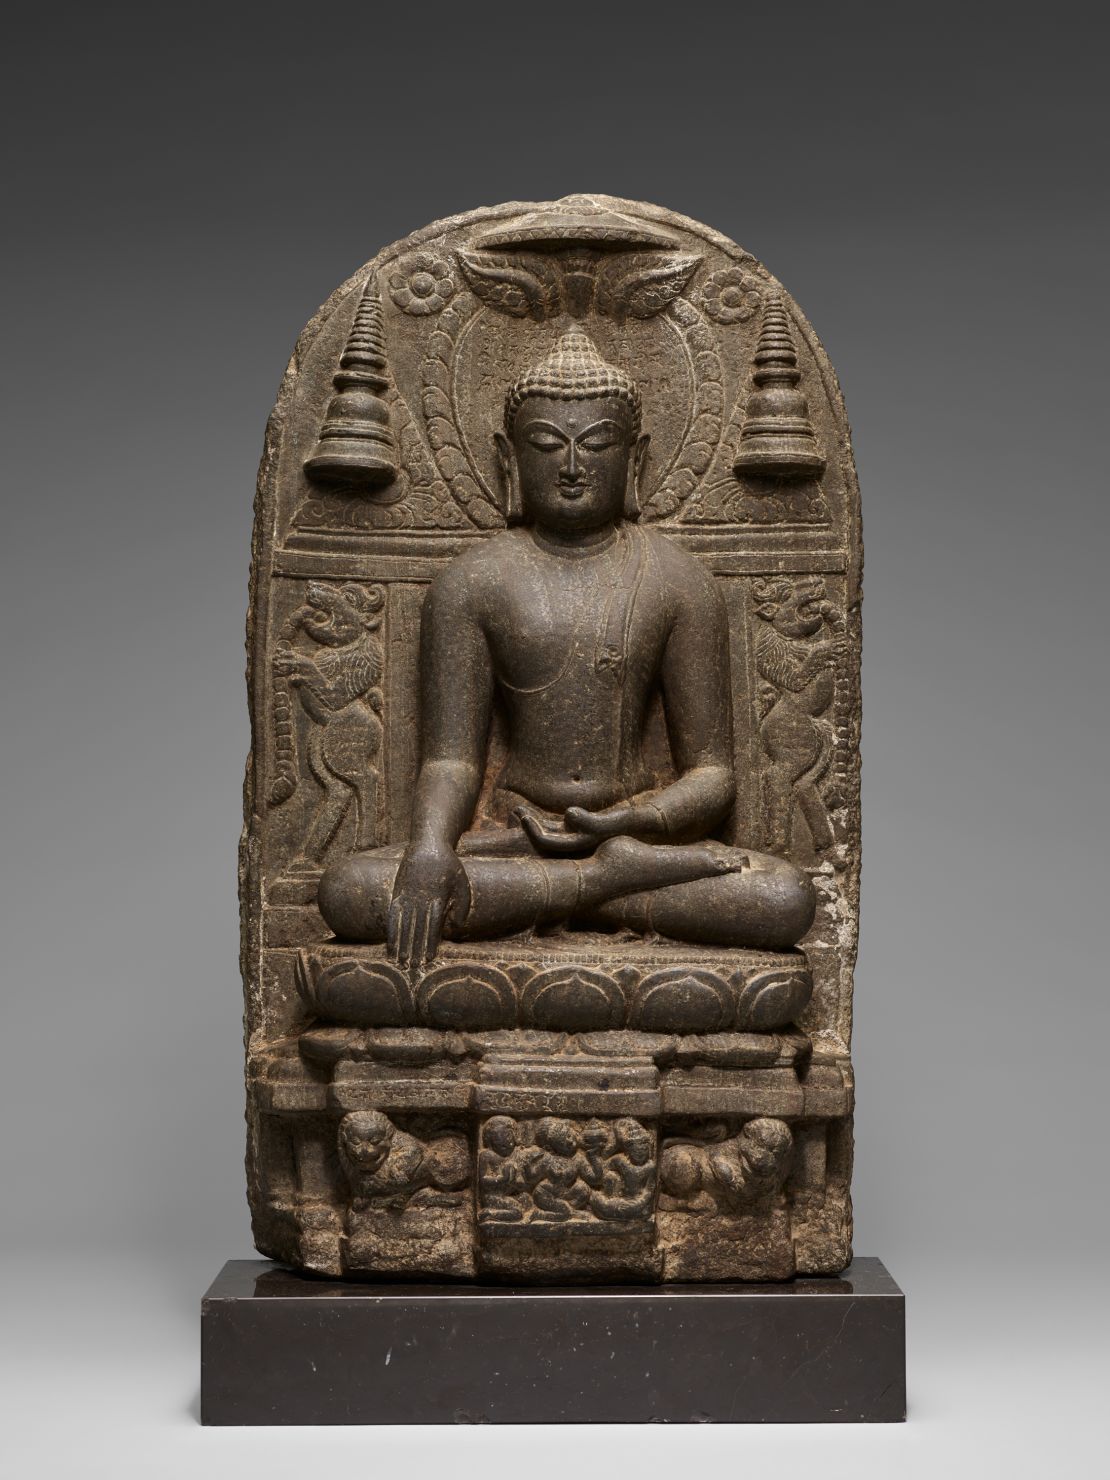 The Buddha triumphing over Mara, a statue in stone from Bihar state, India (approximately 800-900). Part of the Avery Brundage Collection at the Asian Art Museum, San Francisco